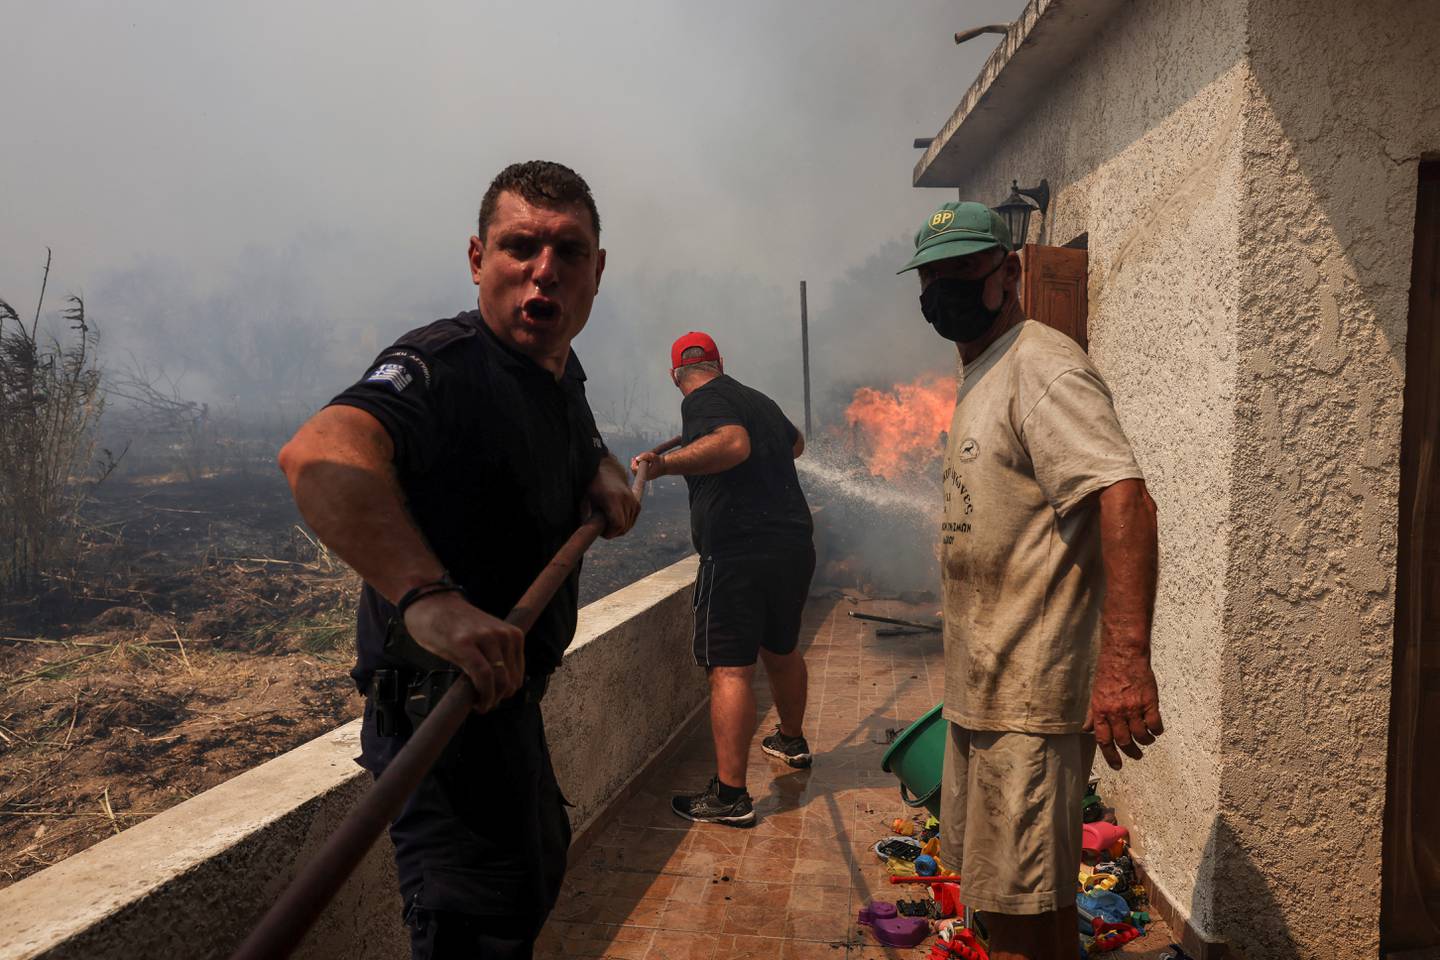 A police officer and residents try to fight back the flames in the village of Vatera, on the island of Lesbos, Greece. Reuters